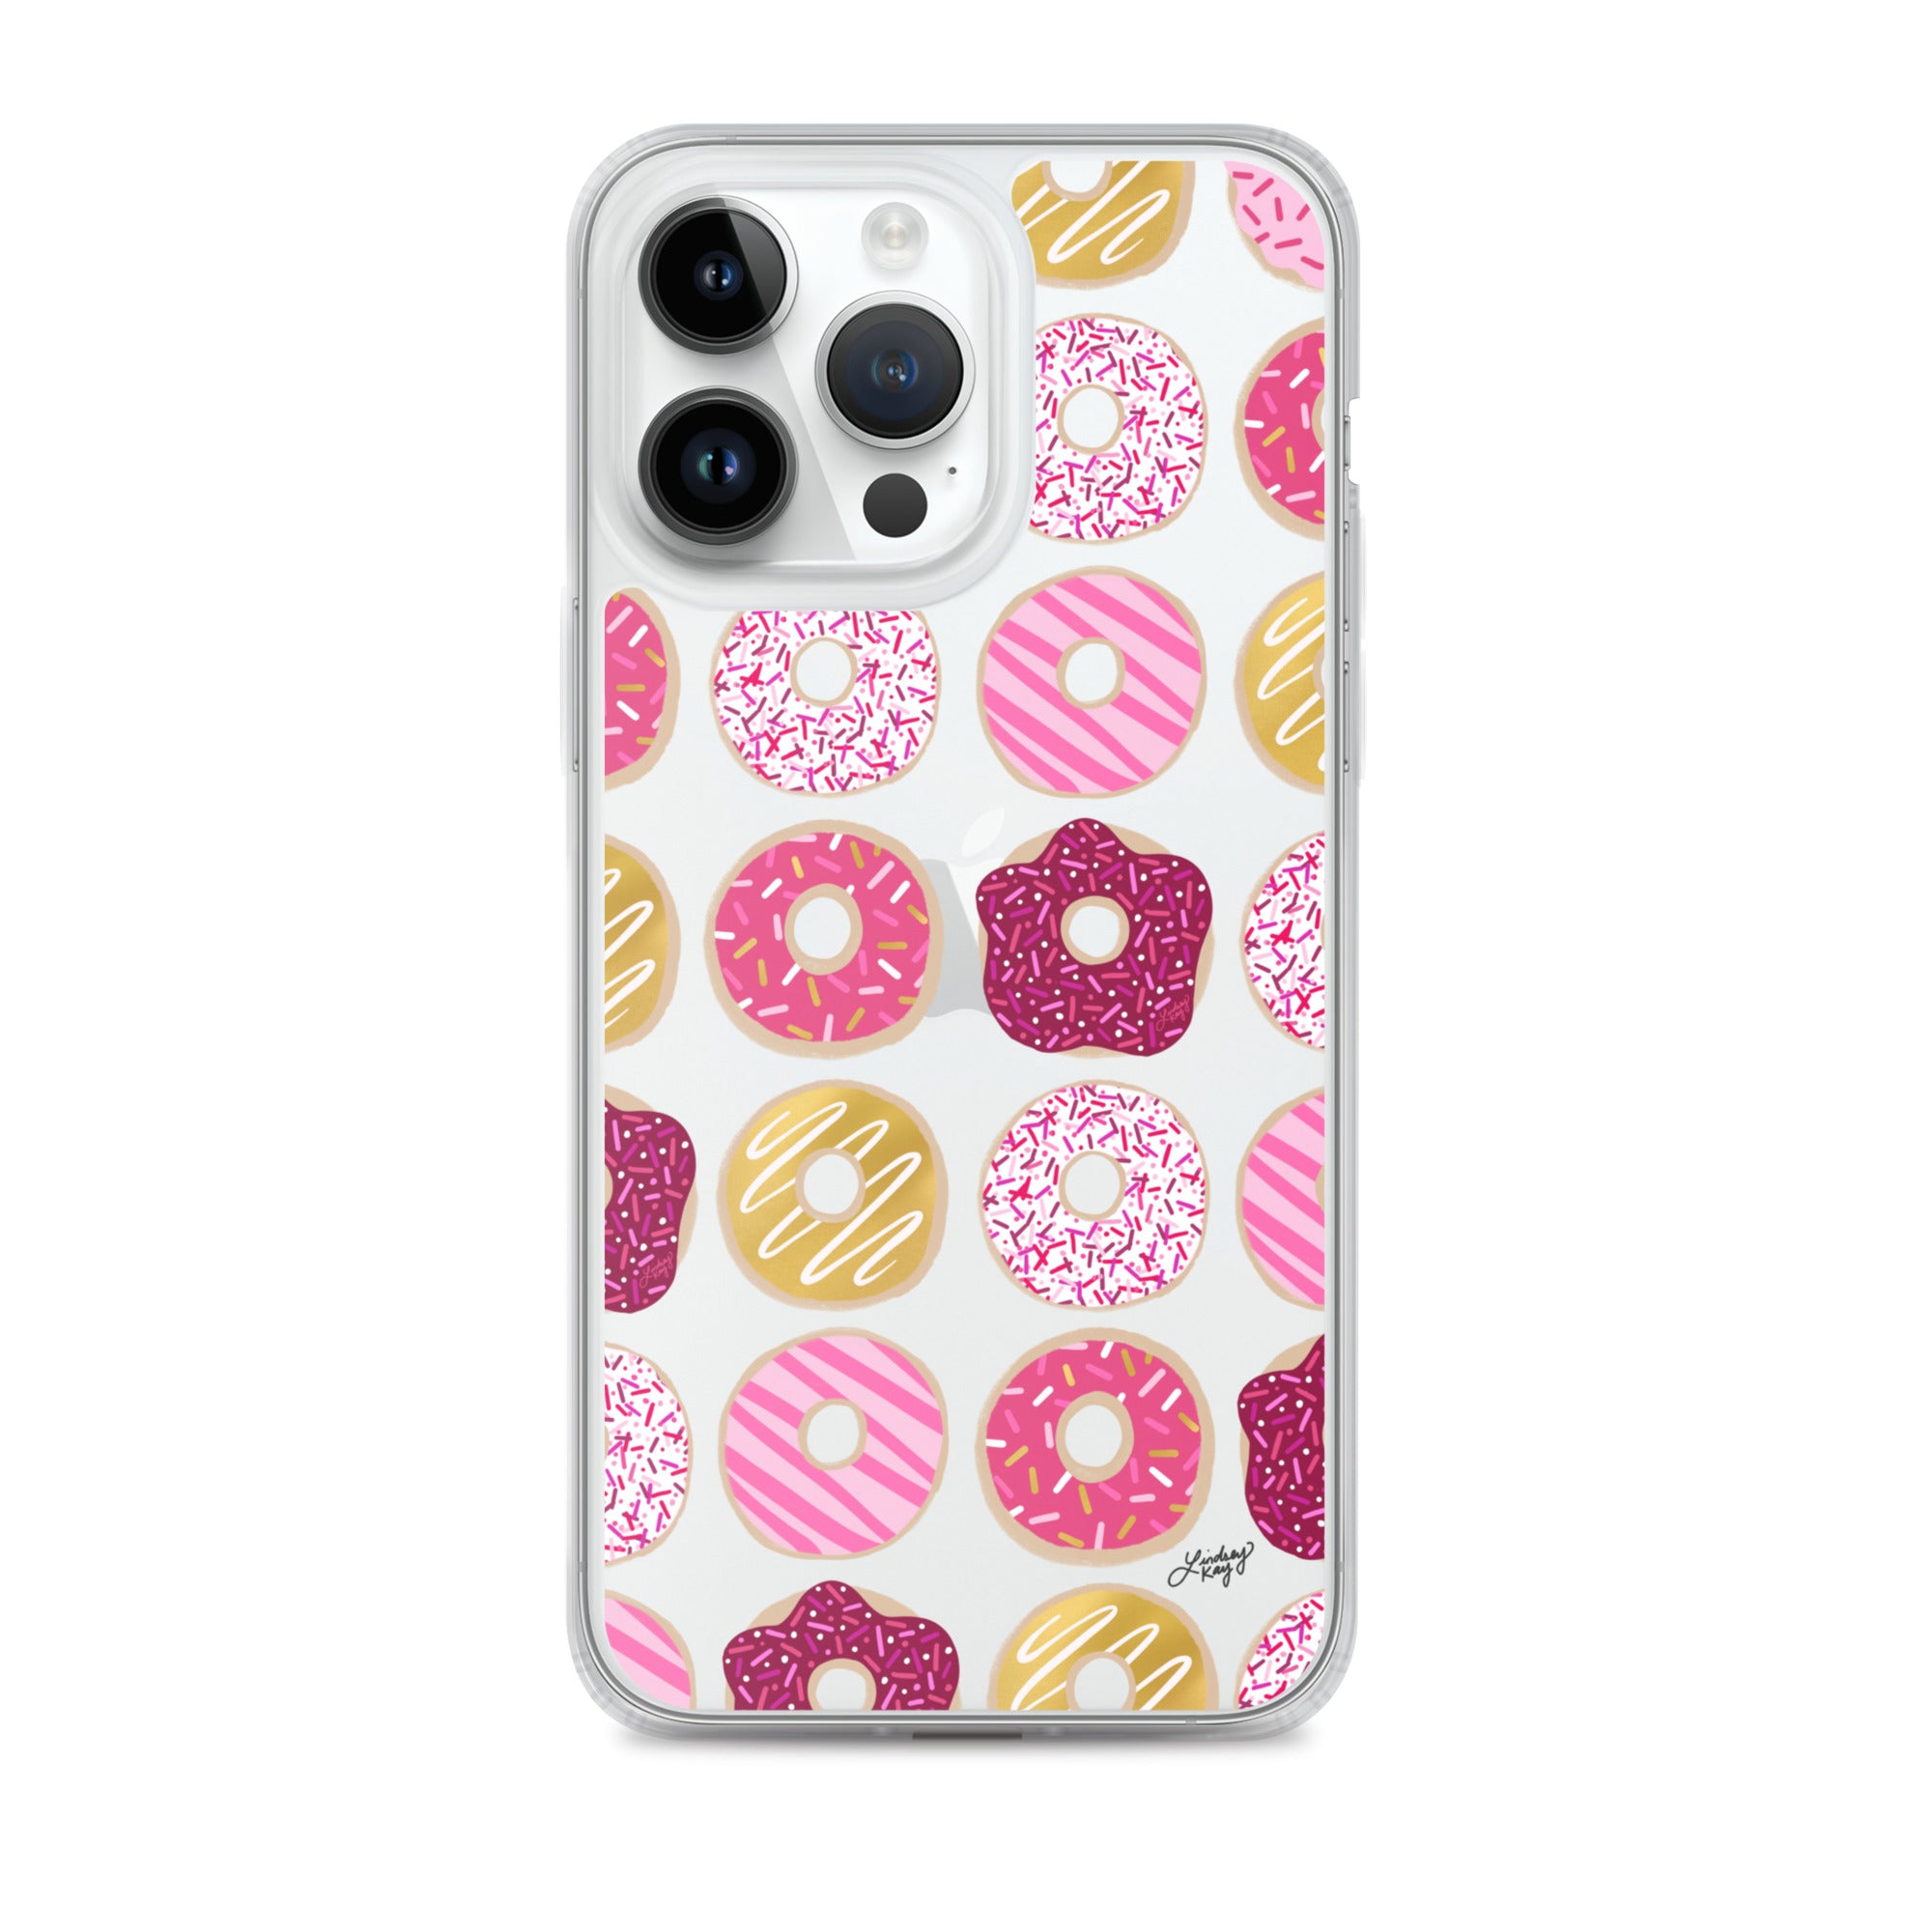 valentine's day donuts pattern pink gold cute funny trendy doughnuts illustration artwork lindsey kay collective icing food deserts pink-iphone-case sprinkles